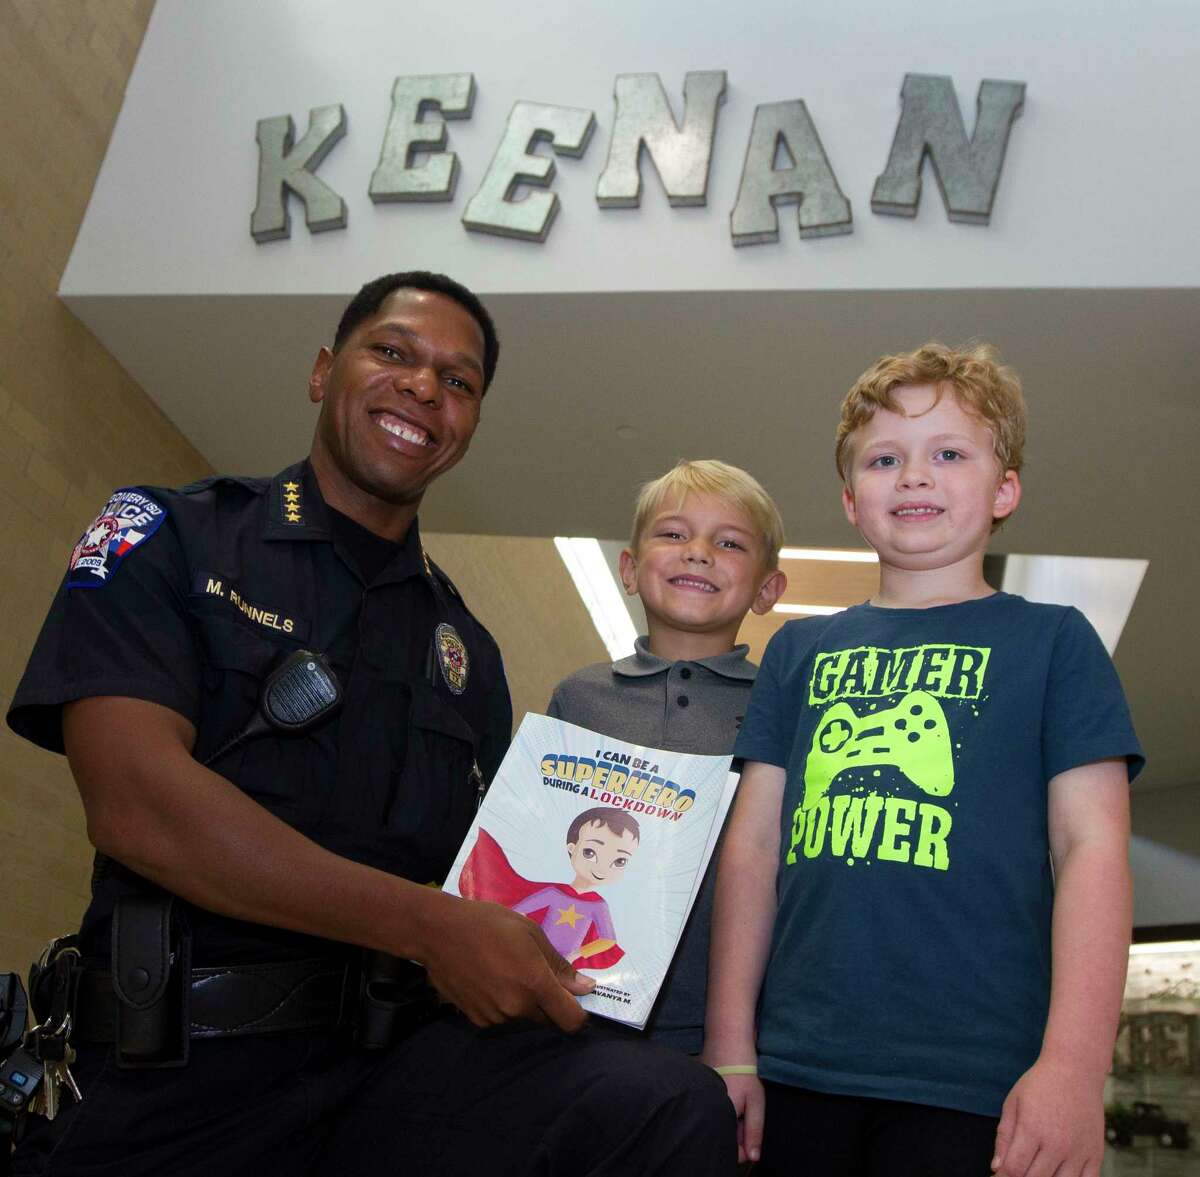 Montgomery ISD Police Chief Marlon Runnels, left, pose for a photo beside Keenan Elementary first grade students Lian Haverstock, center and Grayson Bishop recall hiding in a bathroom during a lockdown drill last year, Thursday, Sept. 12, 2019, in Montgomery. Bishop found Haverstock along in the hallway during the drill and the two decided to hide in the restroom for safety before being found by Runnels.